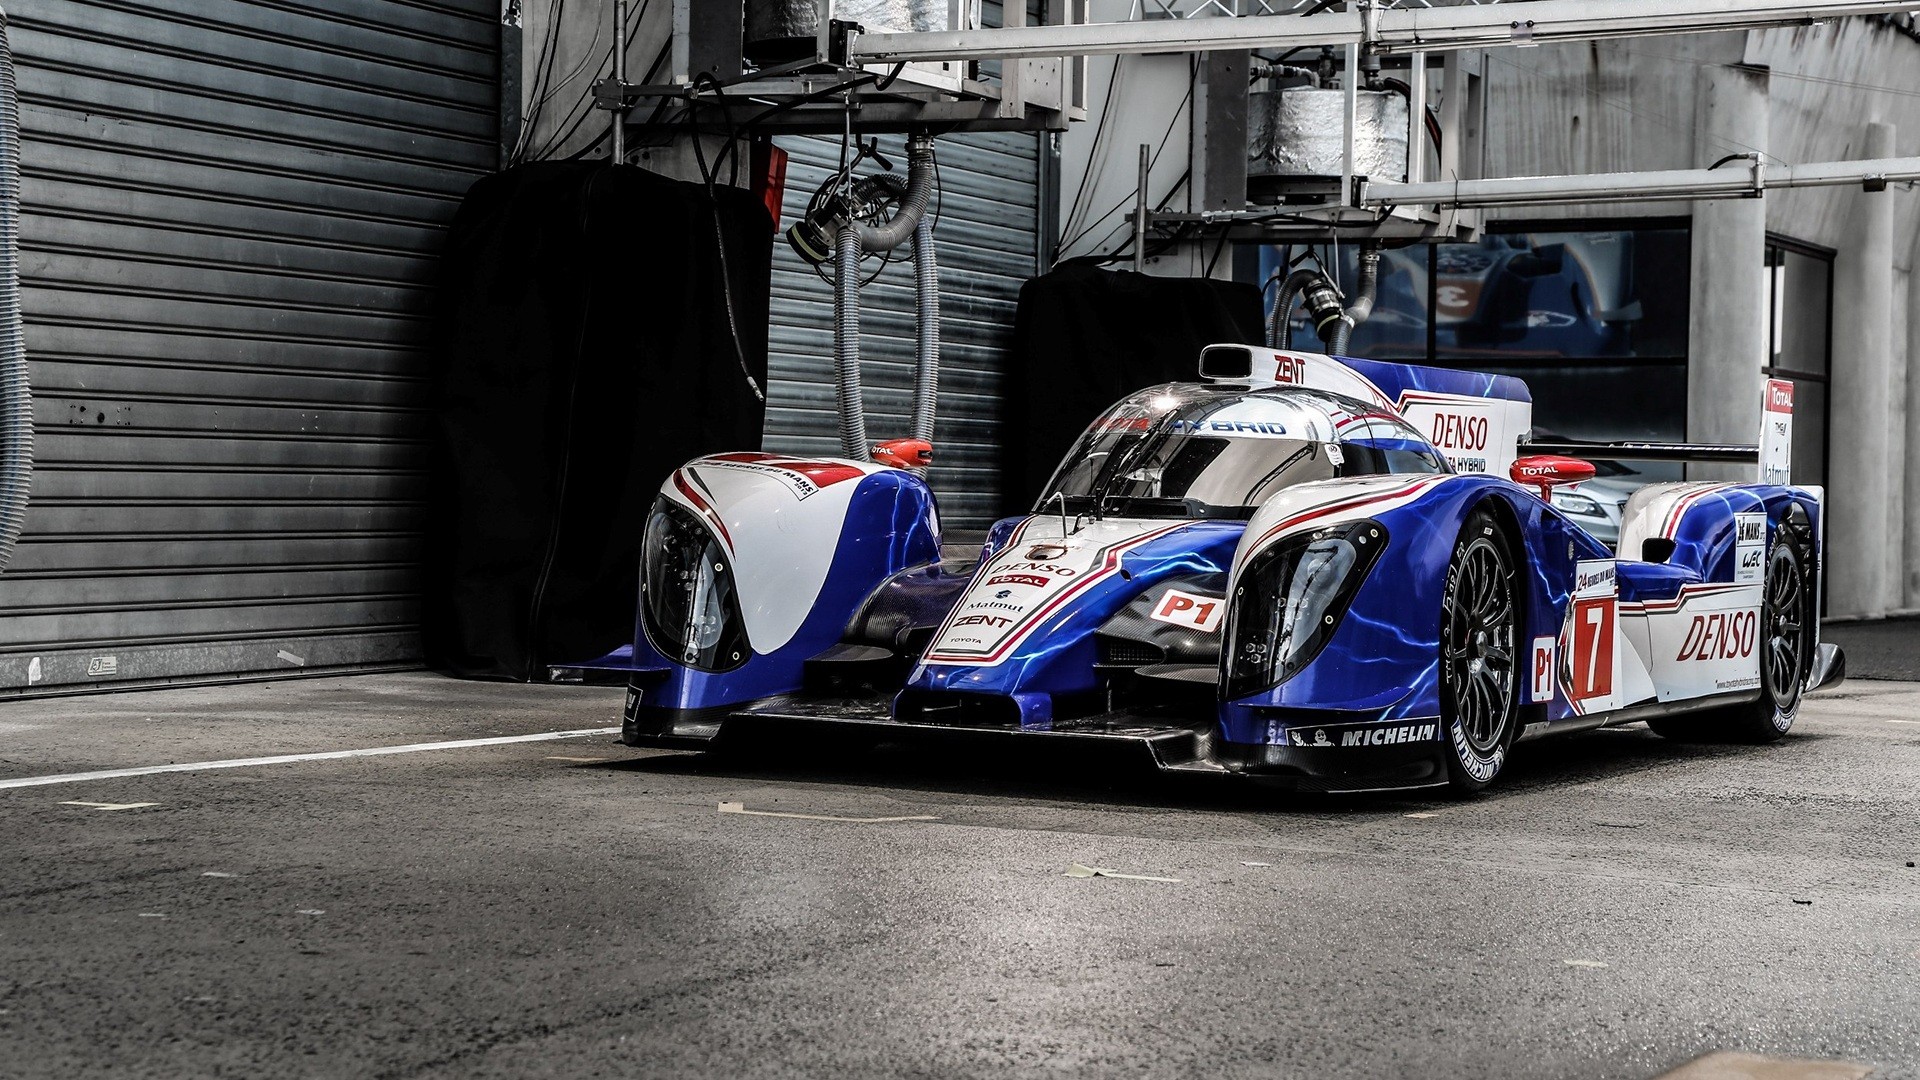 cars, Japanese, Toyota, Le, Mans, Racing, Cars, 24, Hour, Endurance, Race, Toyota, Ts030, Hybrid, 24, Hours, Of, Le, Mans Wallpaper